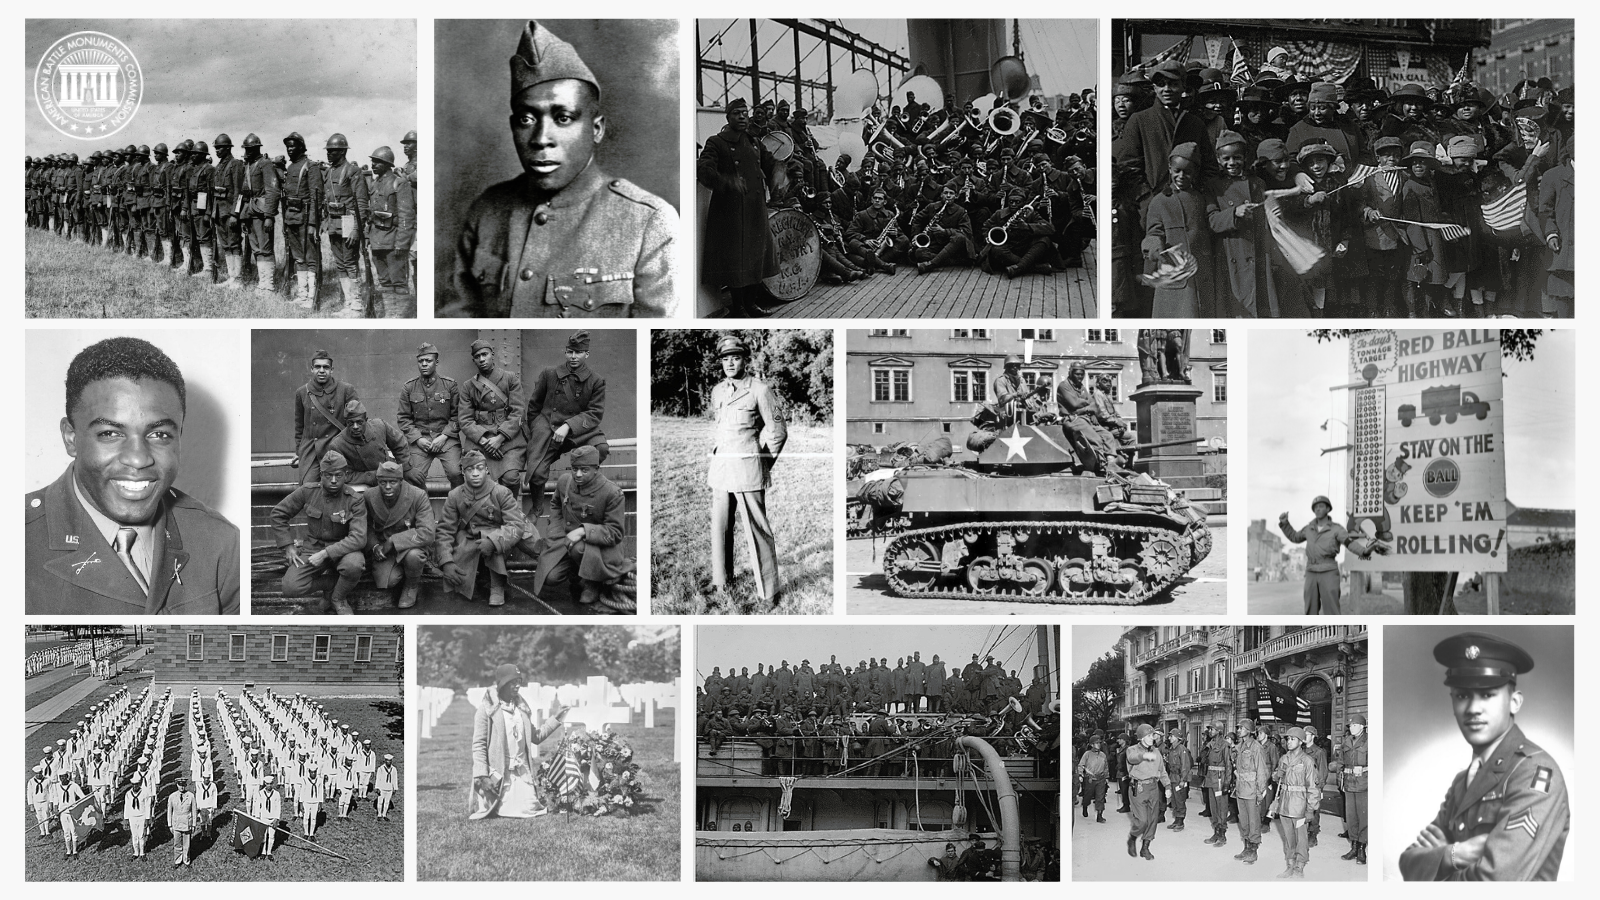 Honoring Black History World War II Service to the Nation, Article